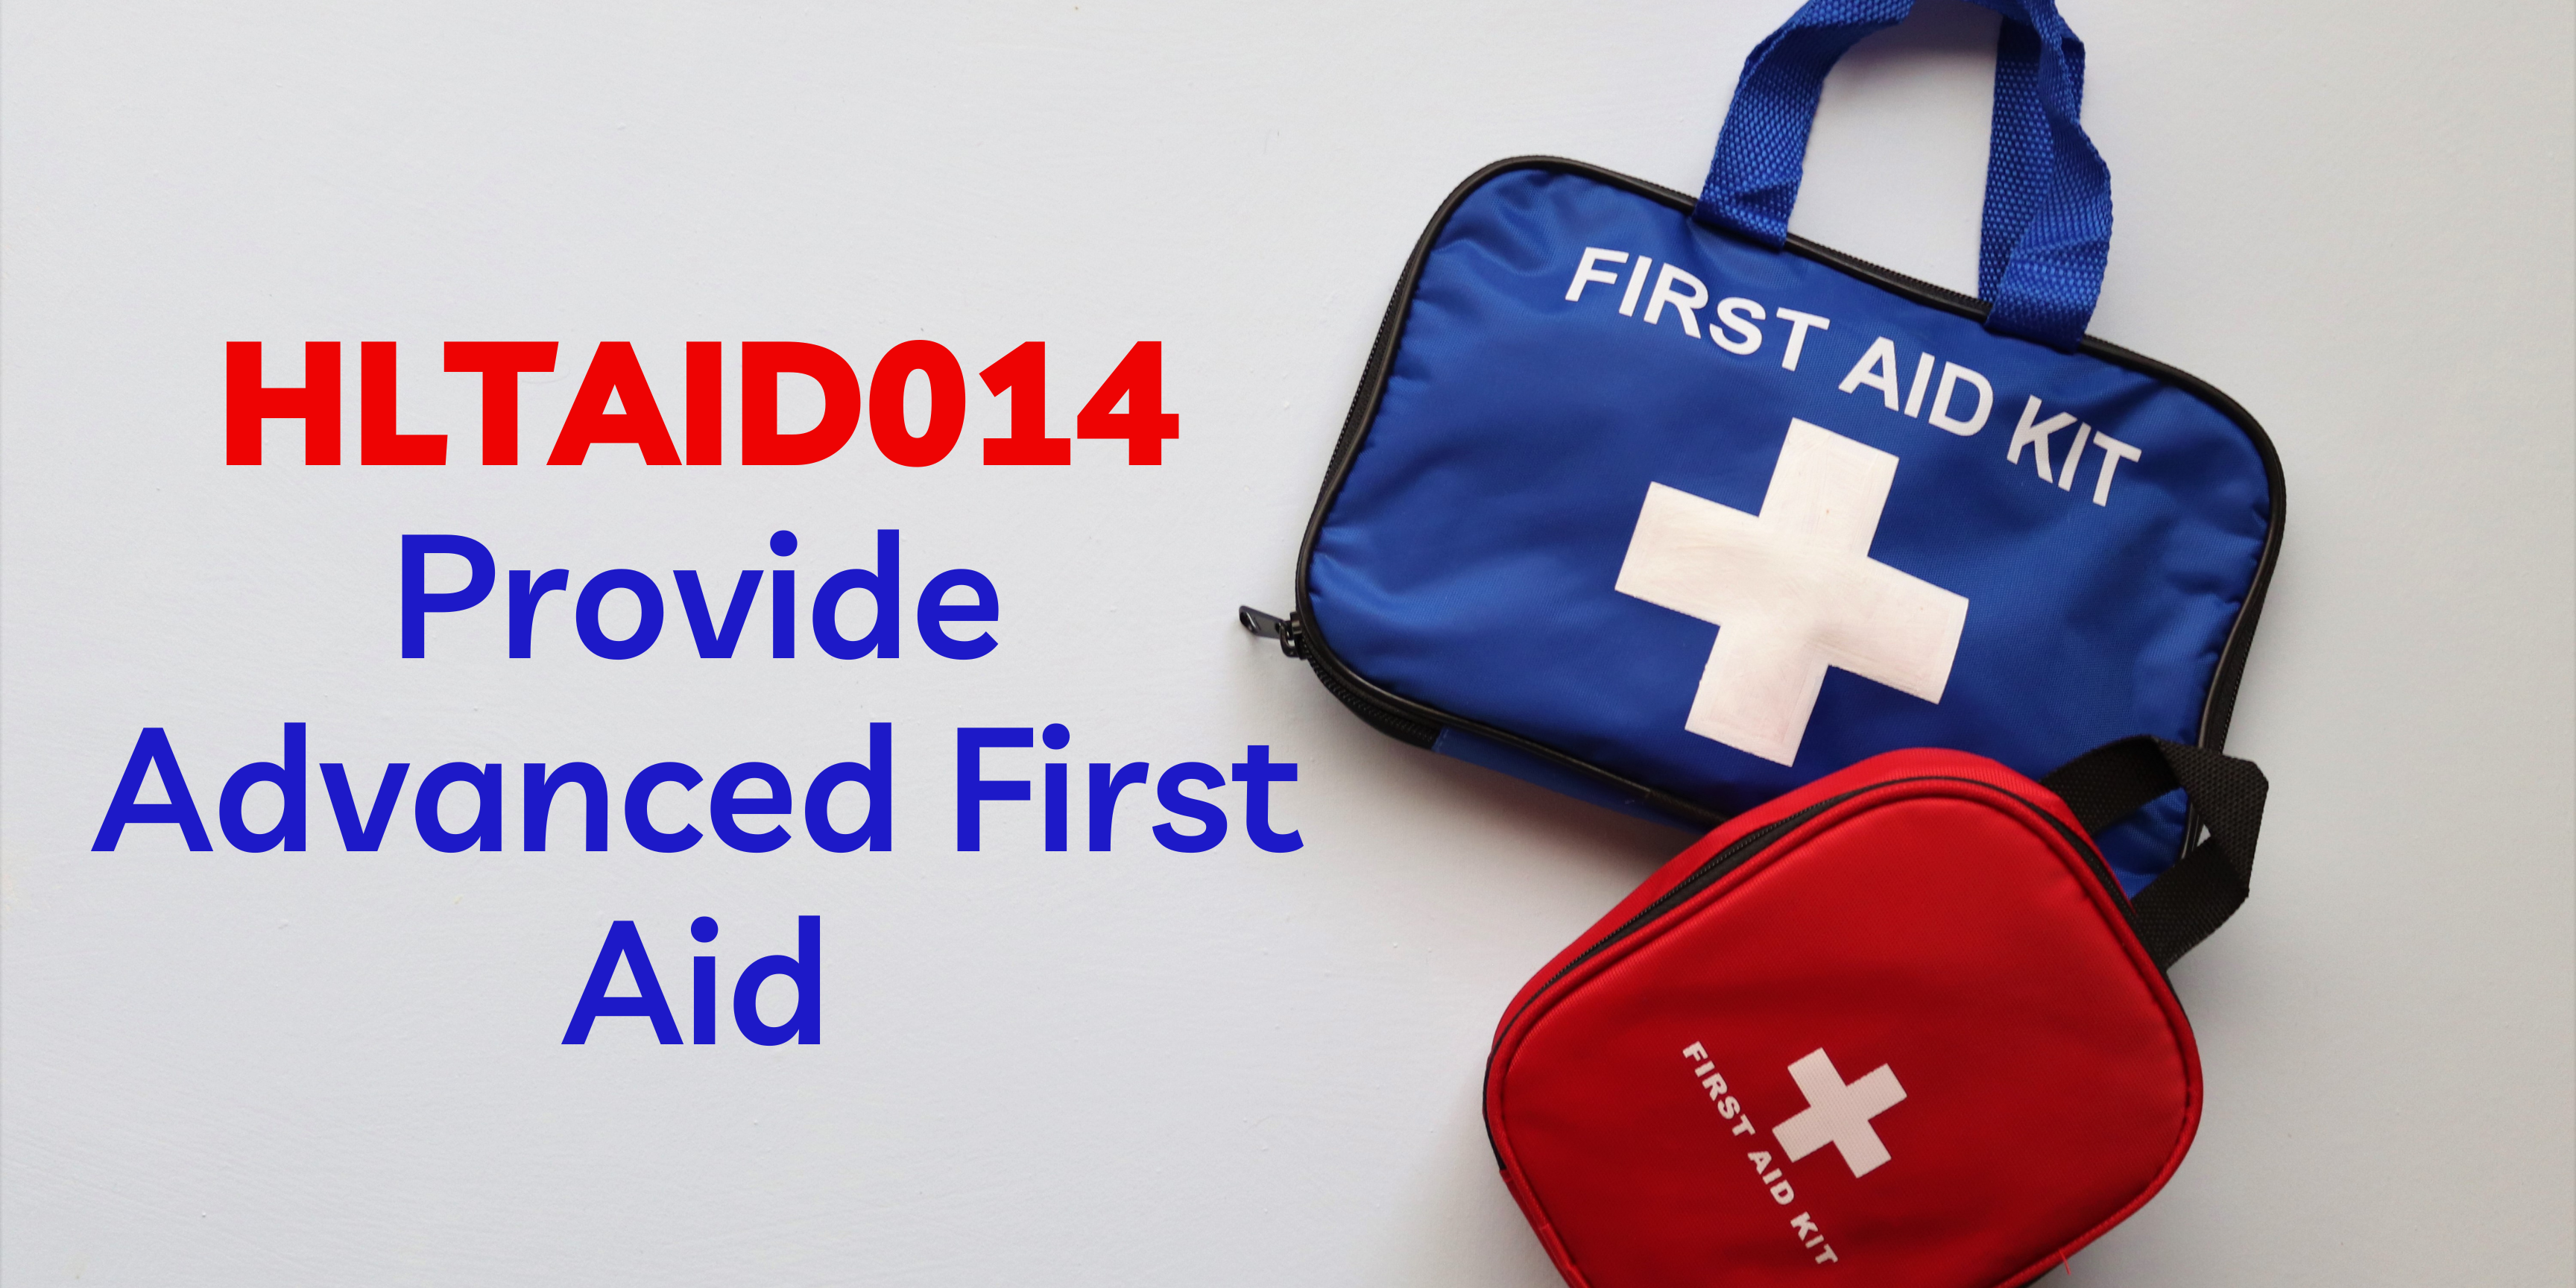 HLTAID014 - Provide Advanced First Aid (1)